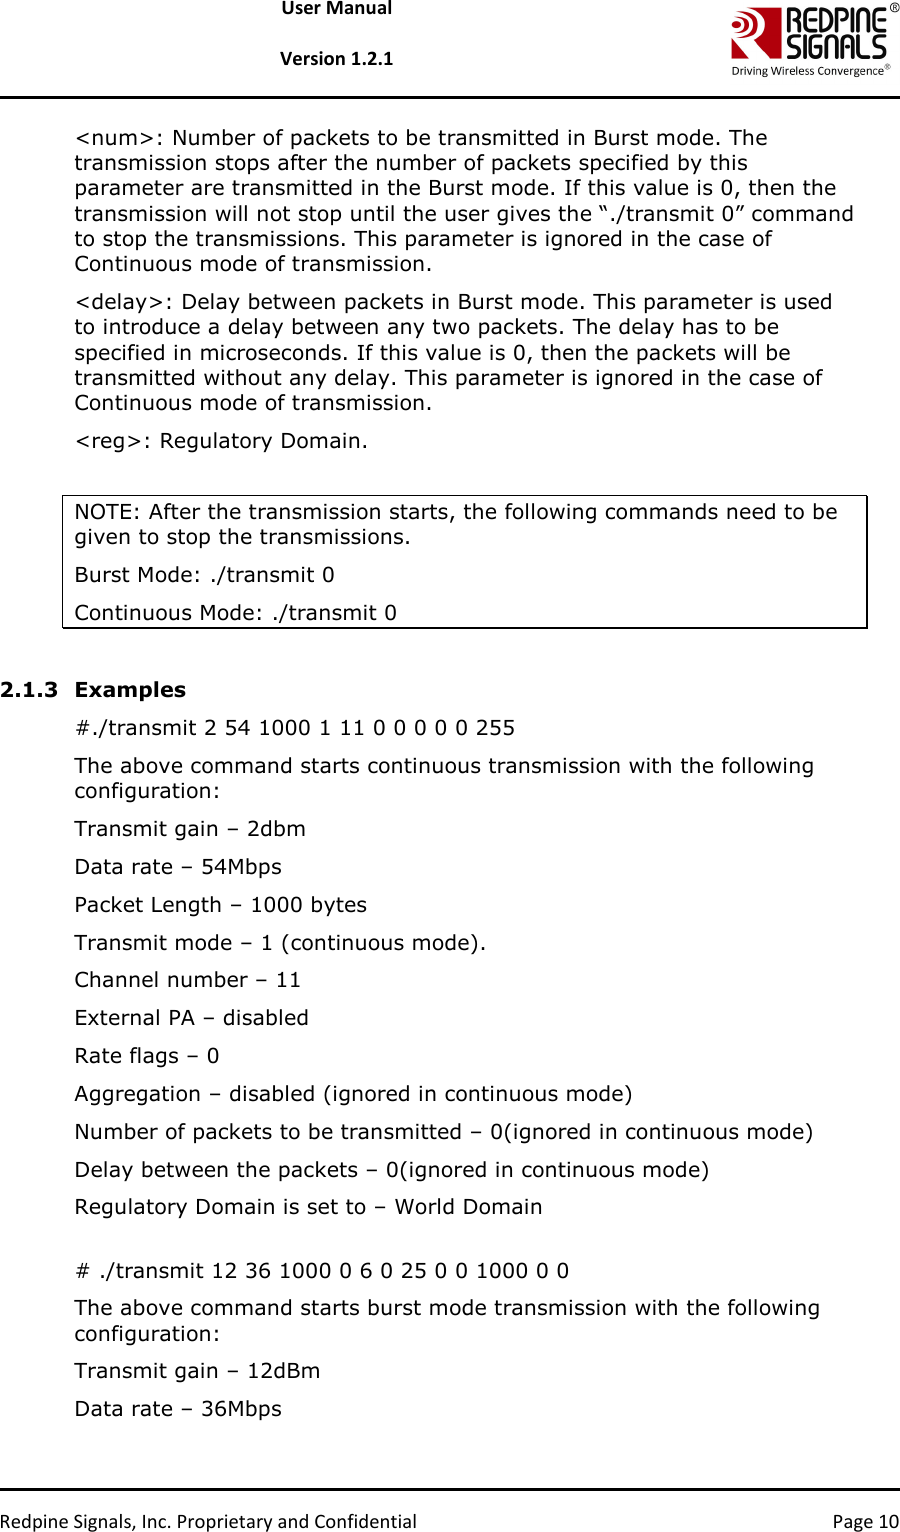   Redpine Signals, Inc. Proprietary and Confidential  Page 10 User Manual  Version 1.2.1 &lt;num&gt;: Number of packets to be transmitted in Burst mode. The transmission stops after the number of packets specified by this parameter are transmitted in the Burst mode. If this value is 0, then the transmission will not stop until the user gives the “./transmit 0” command to stop the transmissions. This parameter is ignored in the case of Continuous mode of transmission. &lt;delay&gt;: Delay between packets in Burst mode. This parameter is used to introduce a delay between any two packets. The delay has to be specified in microseconds. If this value is 0, then the packets will be transmitted without any delay. This parameter is ignored in the case of Continuous mode of transmission. &lt;reg&gt;: Regulatory Domain.   NOTE: After the transmission starts, the following commands need to be given to stop the transmissions. Burst Mode: ./transmit 0 Continuous Mode: ./transmit 0  2.1.3 Examples #./transmit 2 54 1000 1 11 0 0 0 0 0 255 The above command starts continuous transmission with the following configuration: Transmit gain – 2dbm Data rate – 54Mbps Packet Length – 1000 bytes Transmit mode – 1 (continuous mode). Channel number – 11 External PA – disabled Rate flags – 0 Aggregation – disabled (ignored in continuous mode) Number of packets to be transmitted – 0(ignored in continuous mode) Delay between the packets – 0(ignored in continuous mode) Regulatory Domain is set to – World Domain  # ./transmit 12 36 1000 0 6 0 25 0 0 1000 0 0 The above command starts burst mode transmission with the following configuration: Transmit gain – 12dBm Data rate – 36Mbps 